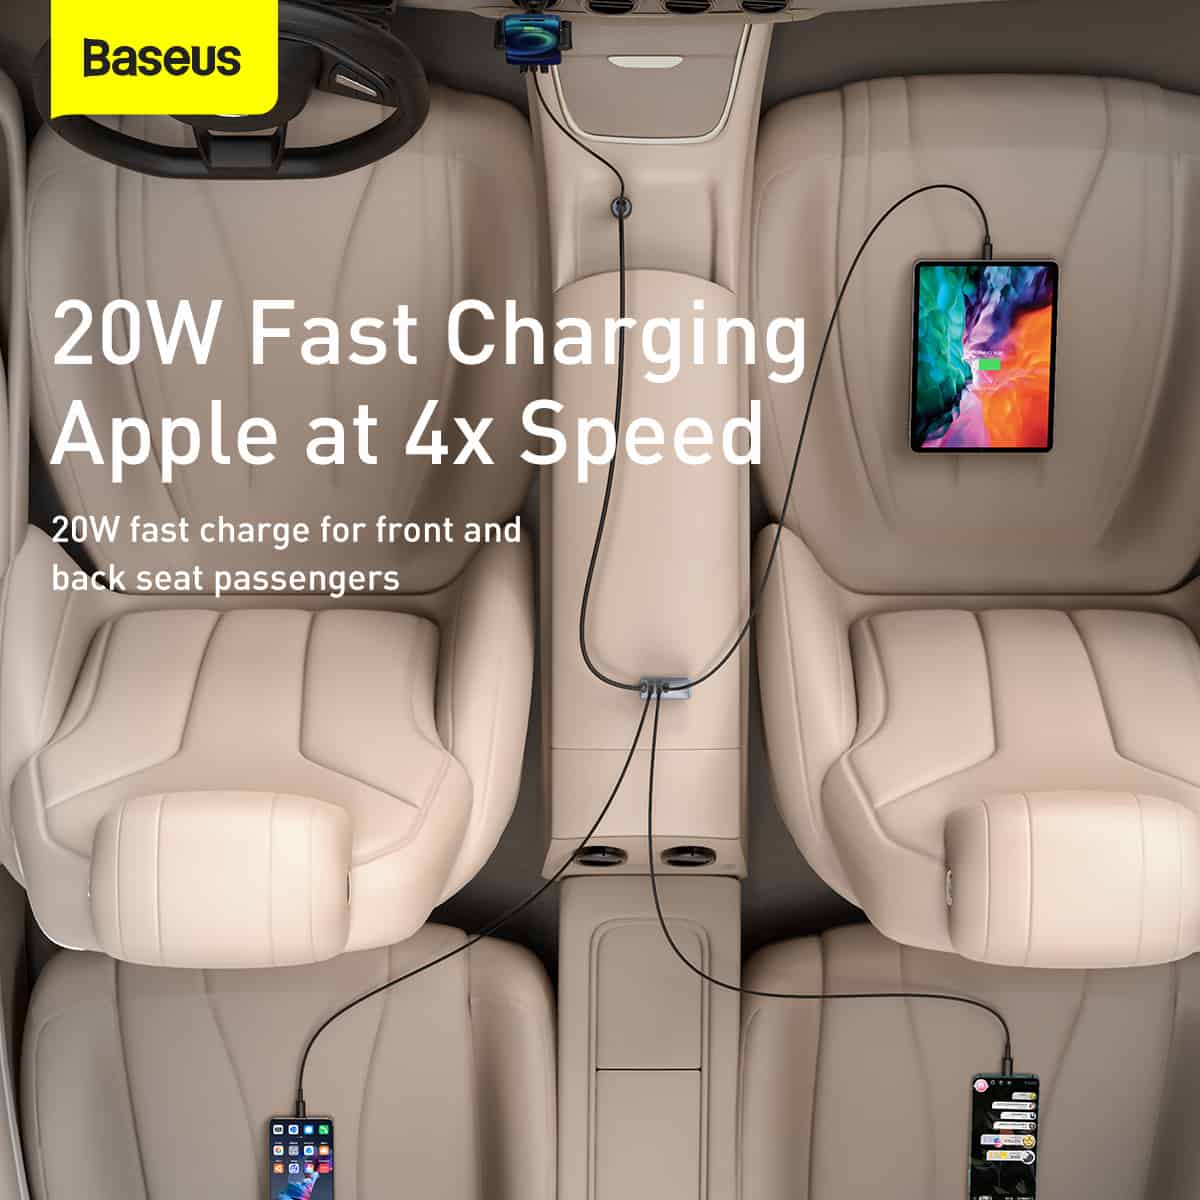 Baseus Share Together Multi Ports Fast Car Charger